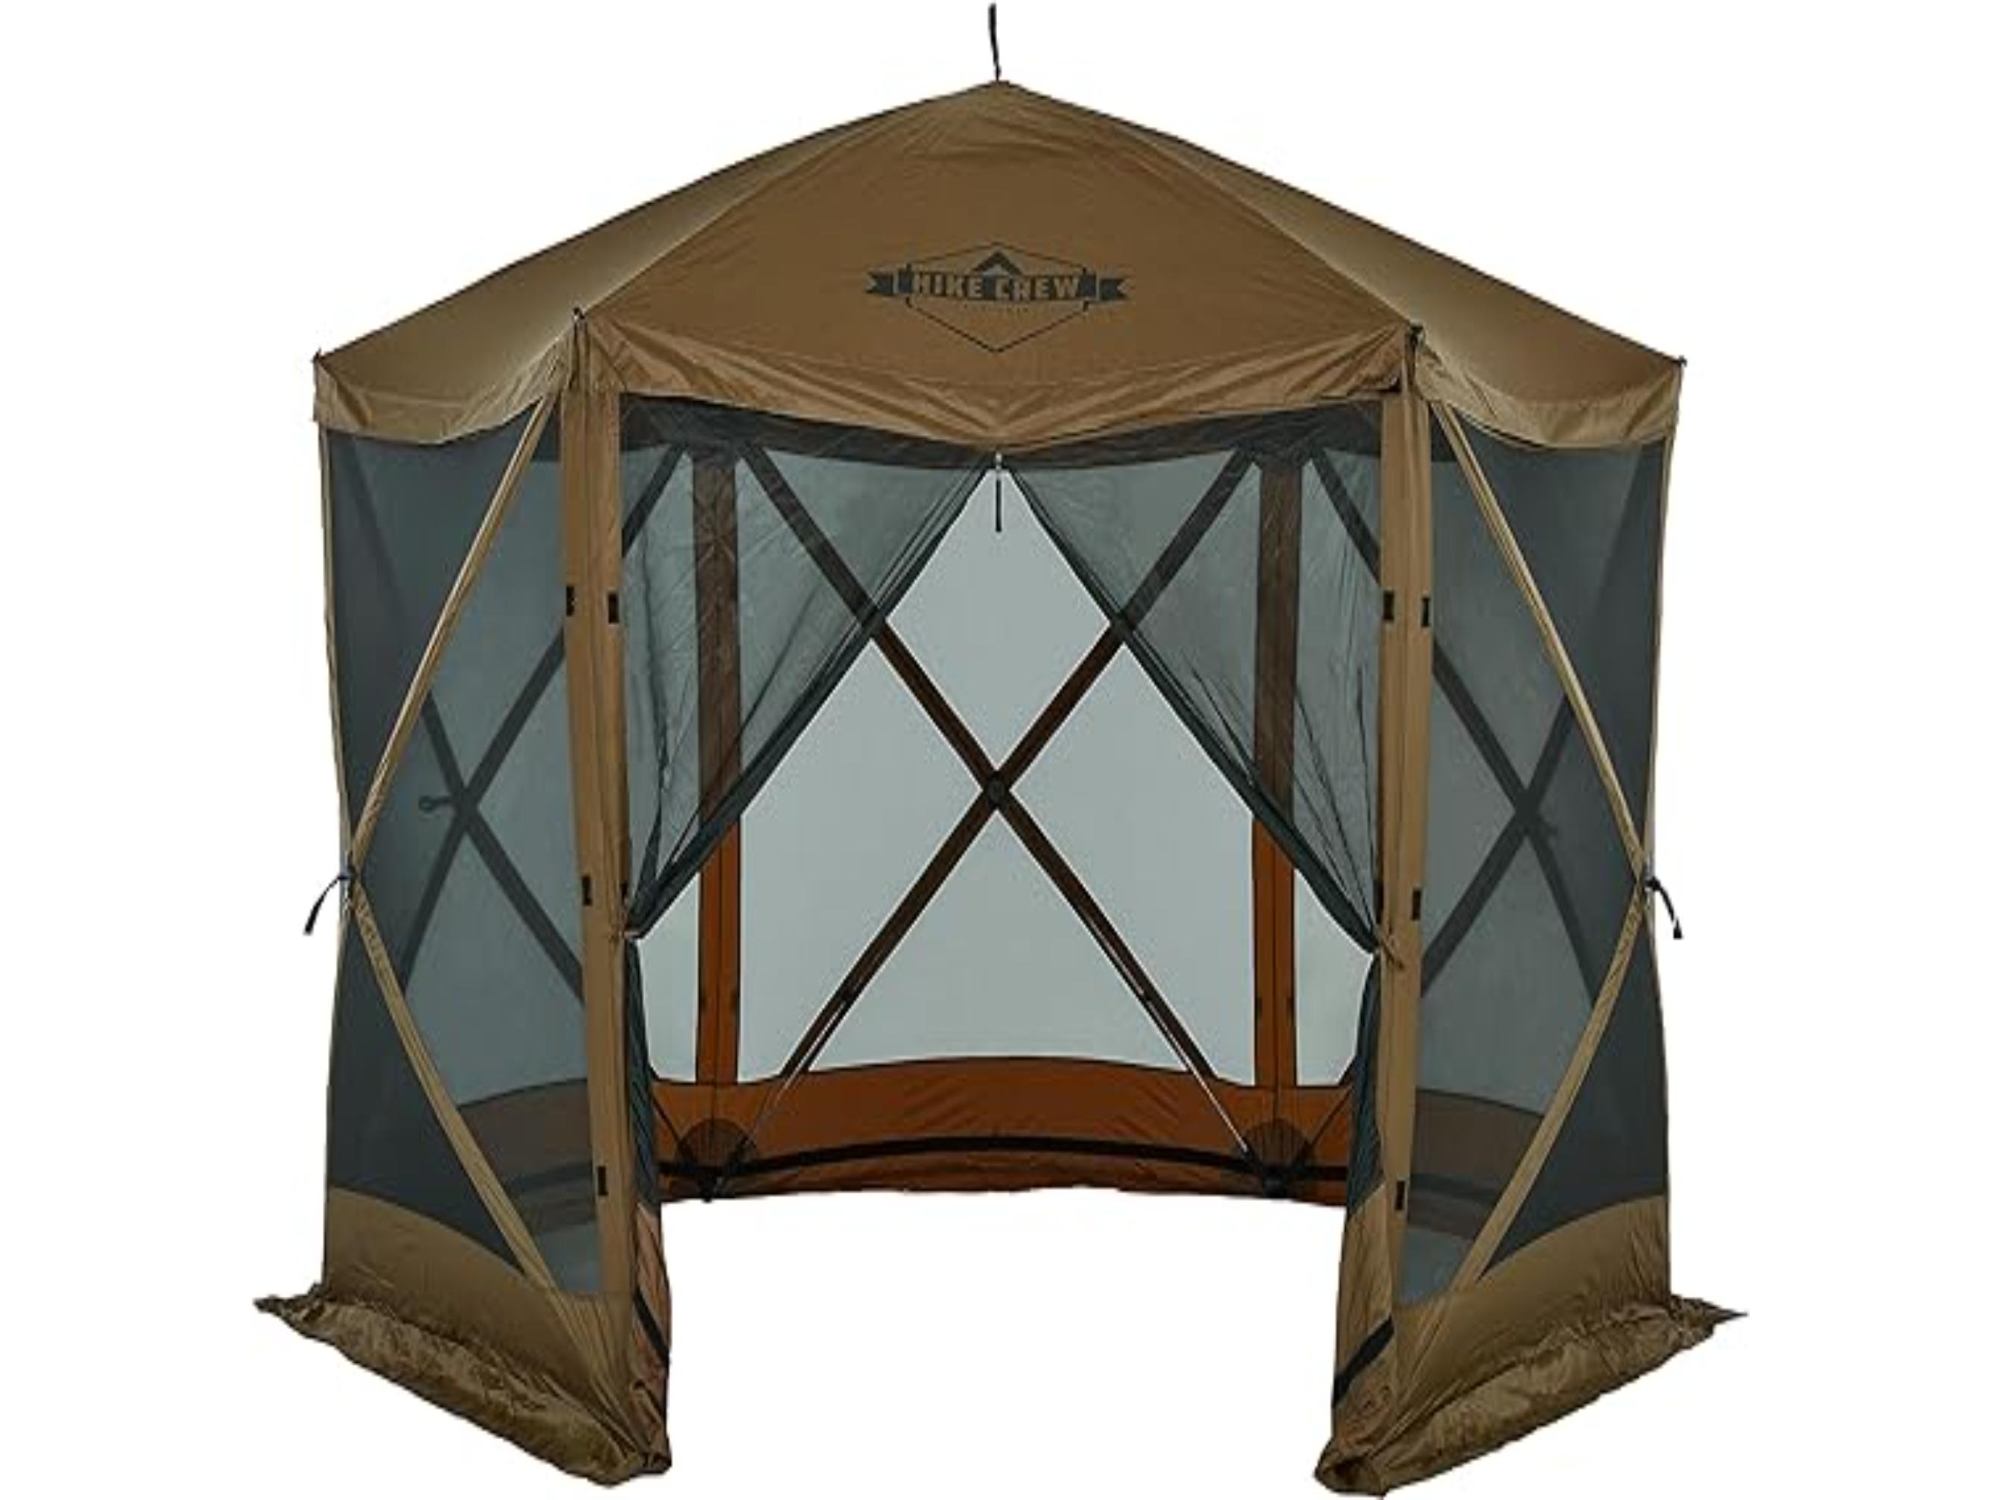 Hike Crew 12 x 12 Pop Up Gazebo, 6-Sided Outdoor Tent Canopy, Brown